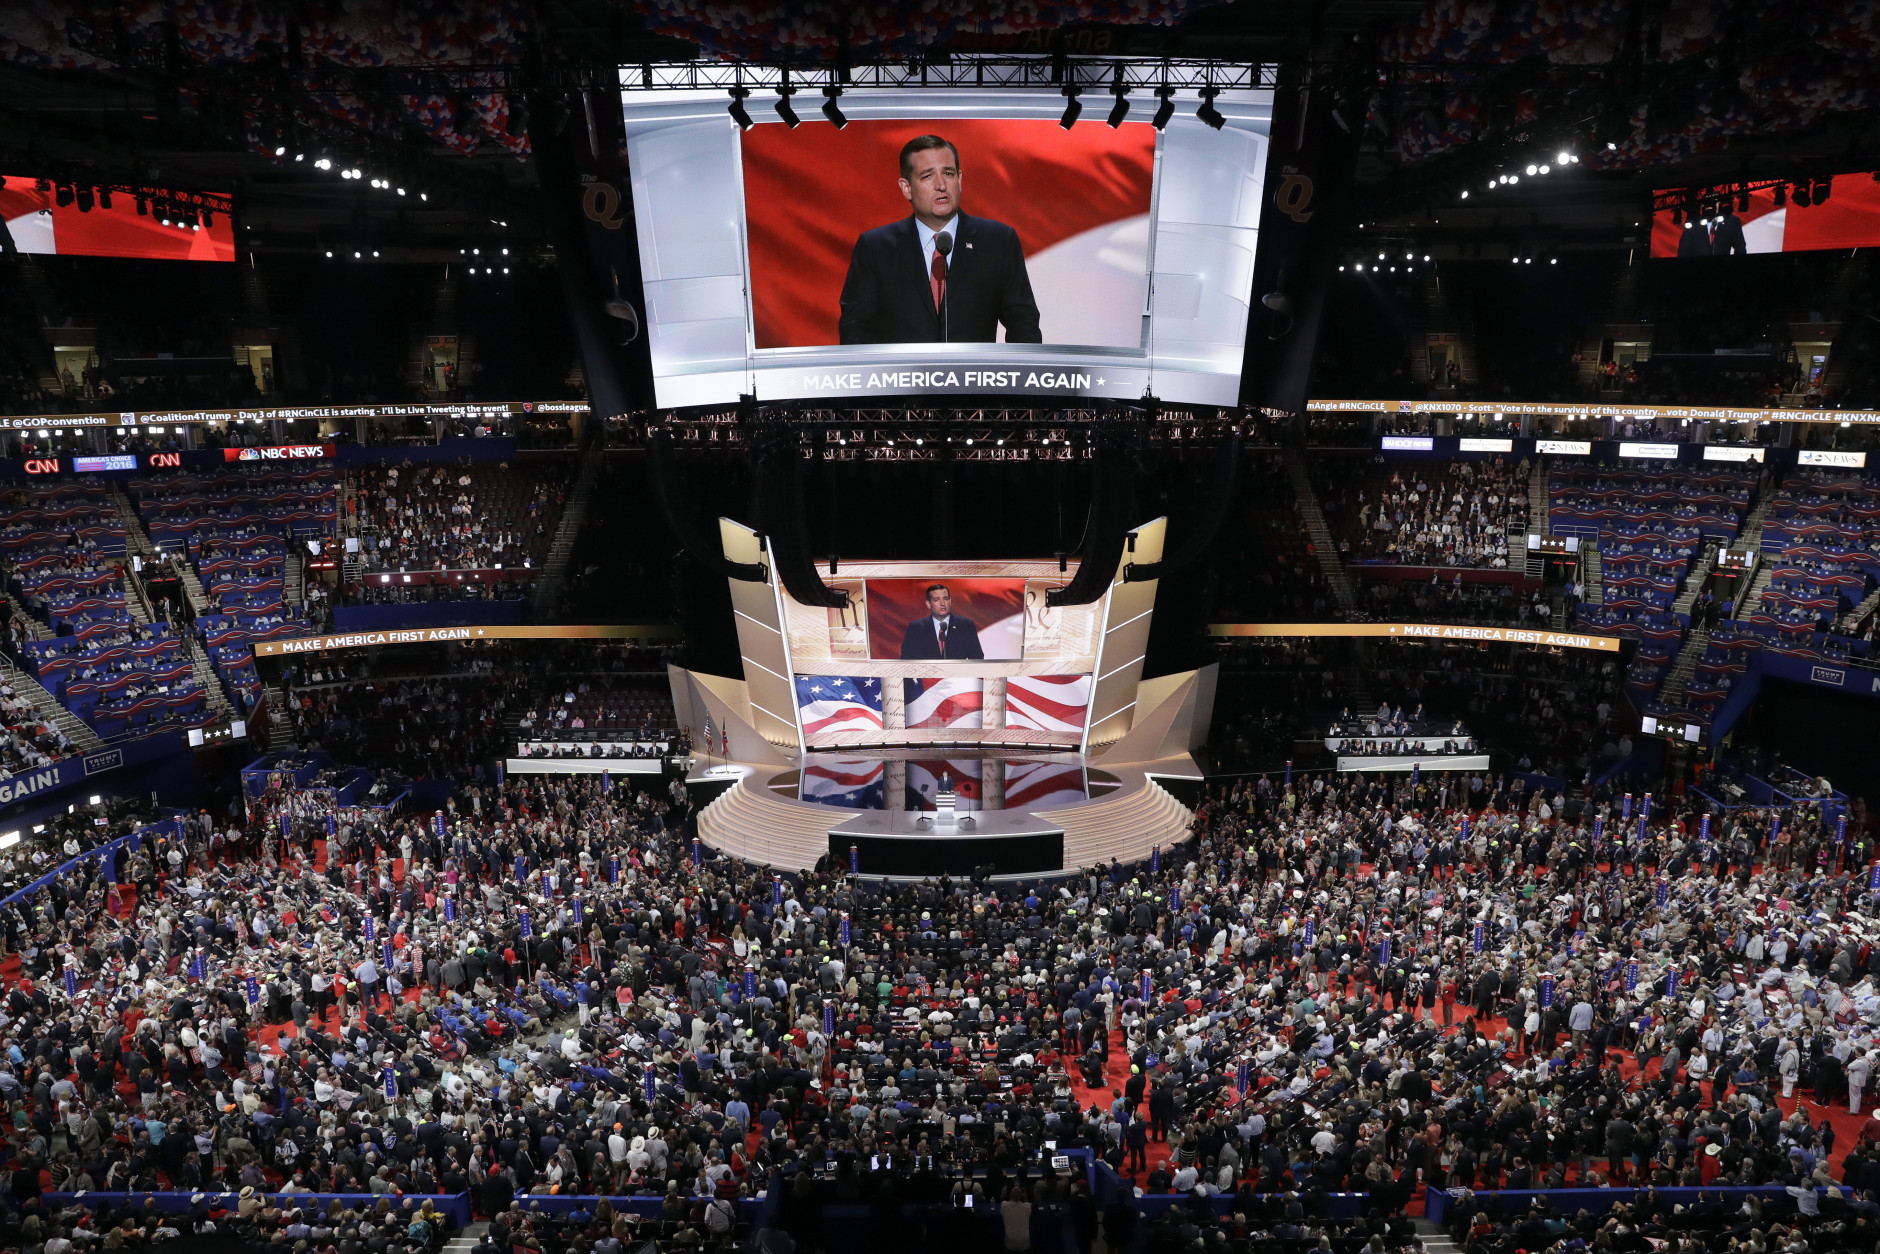 Sen. Ted Cruz, R-Tex., speaks during the third day session of the Republican National Convention in Cleveland, Wednesday, July 20, 2016. (AP Photo/John Locher)